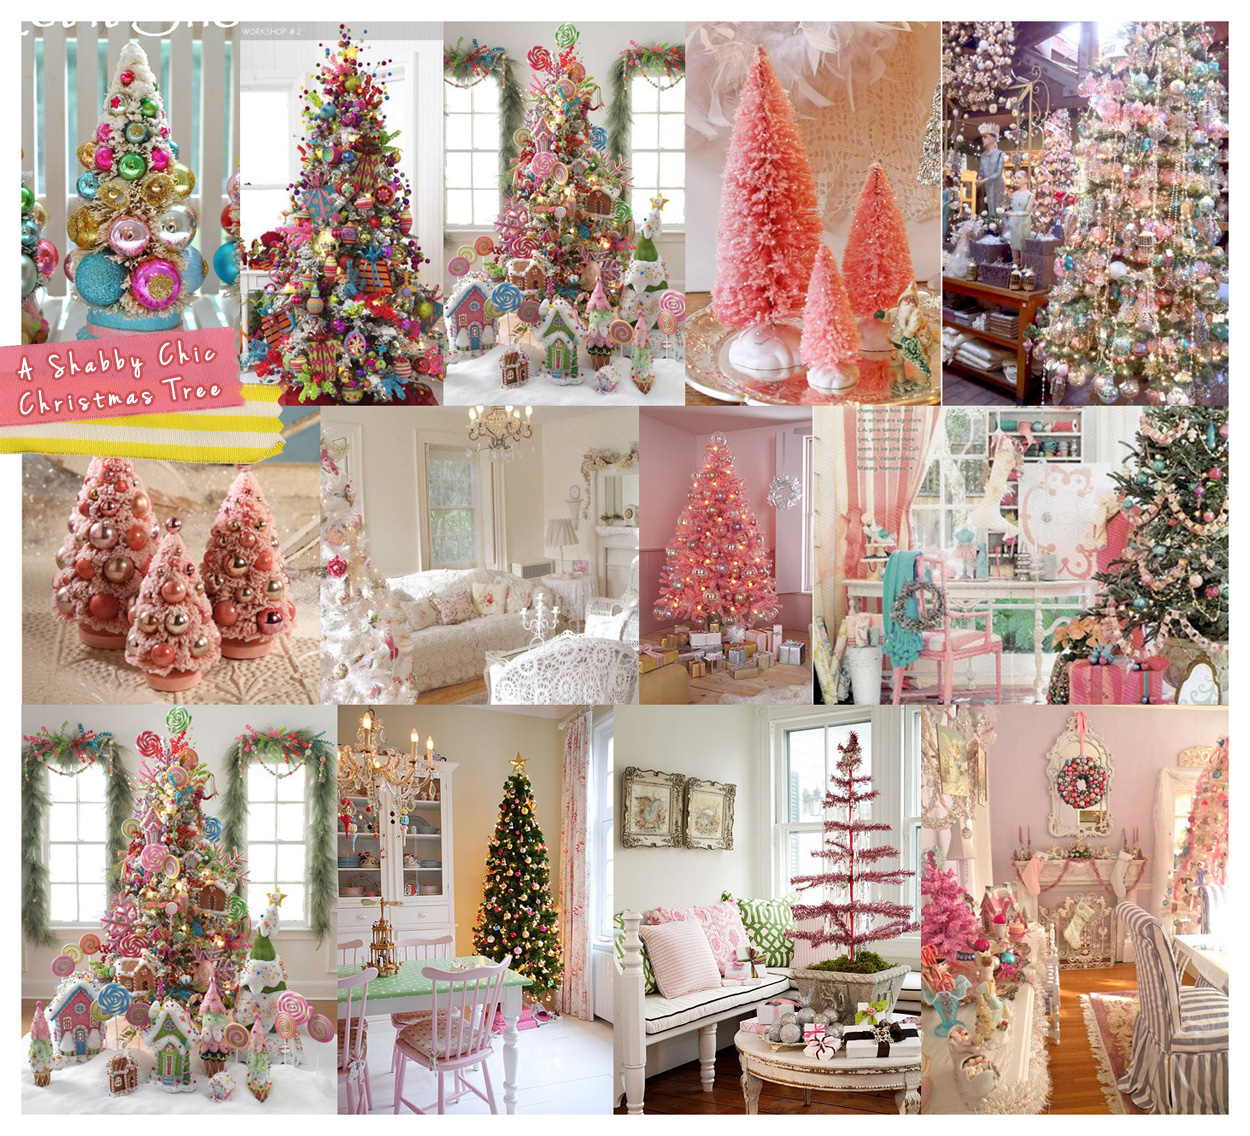 Linky Party and a touch of pink eye candy! - The Cottage Market